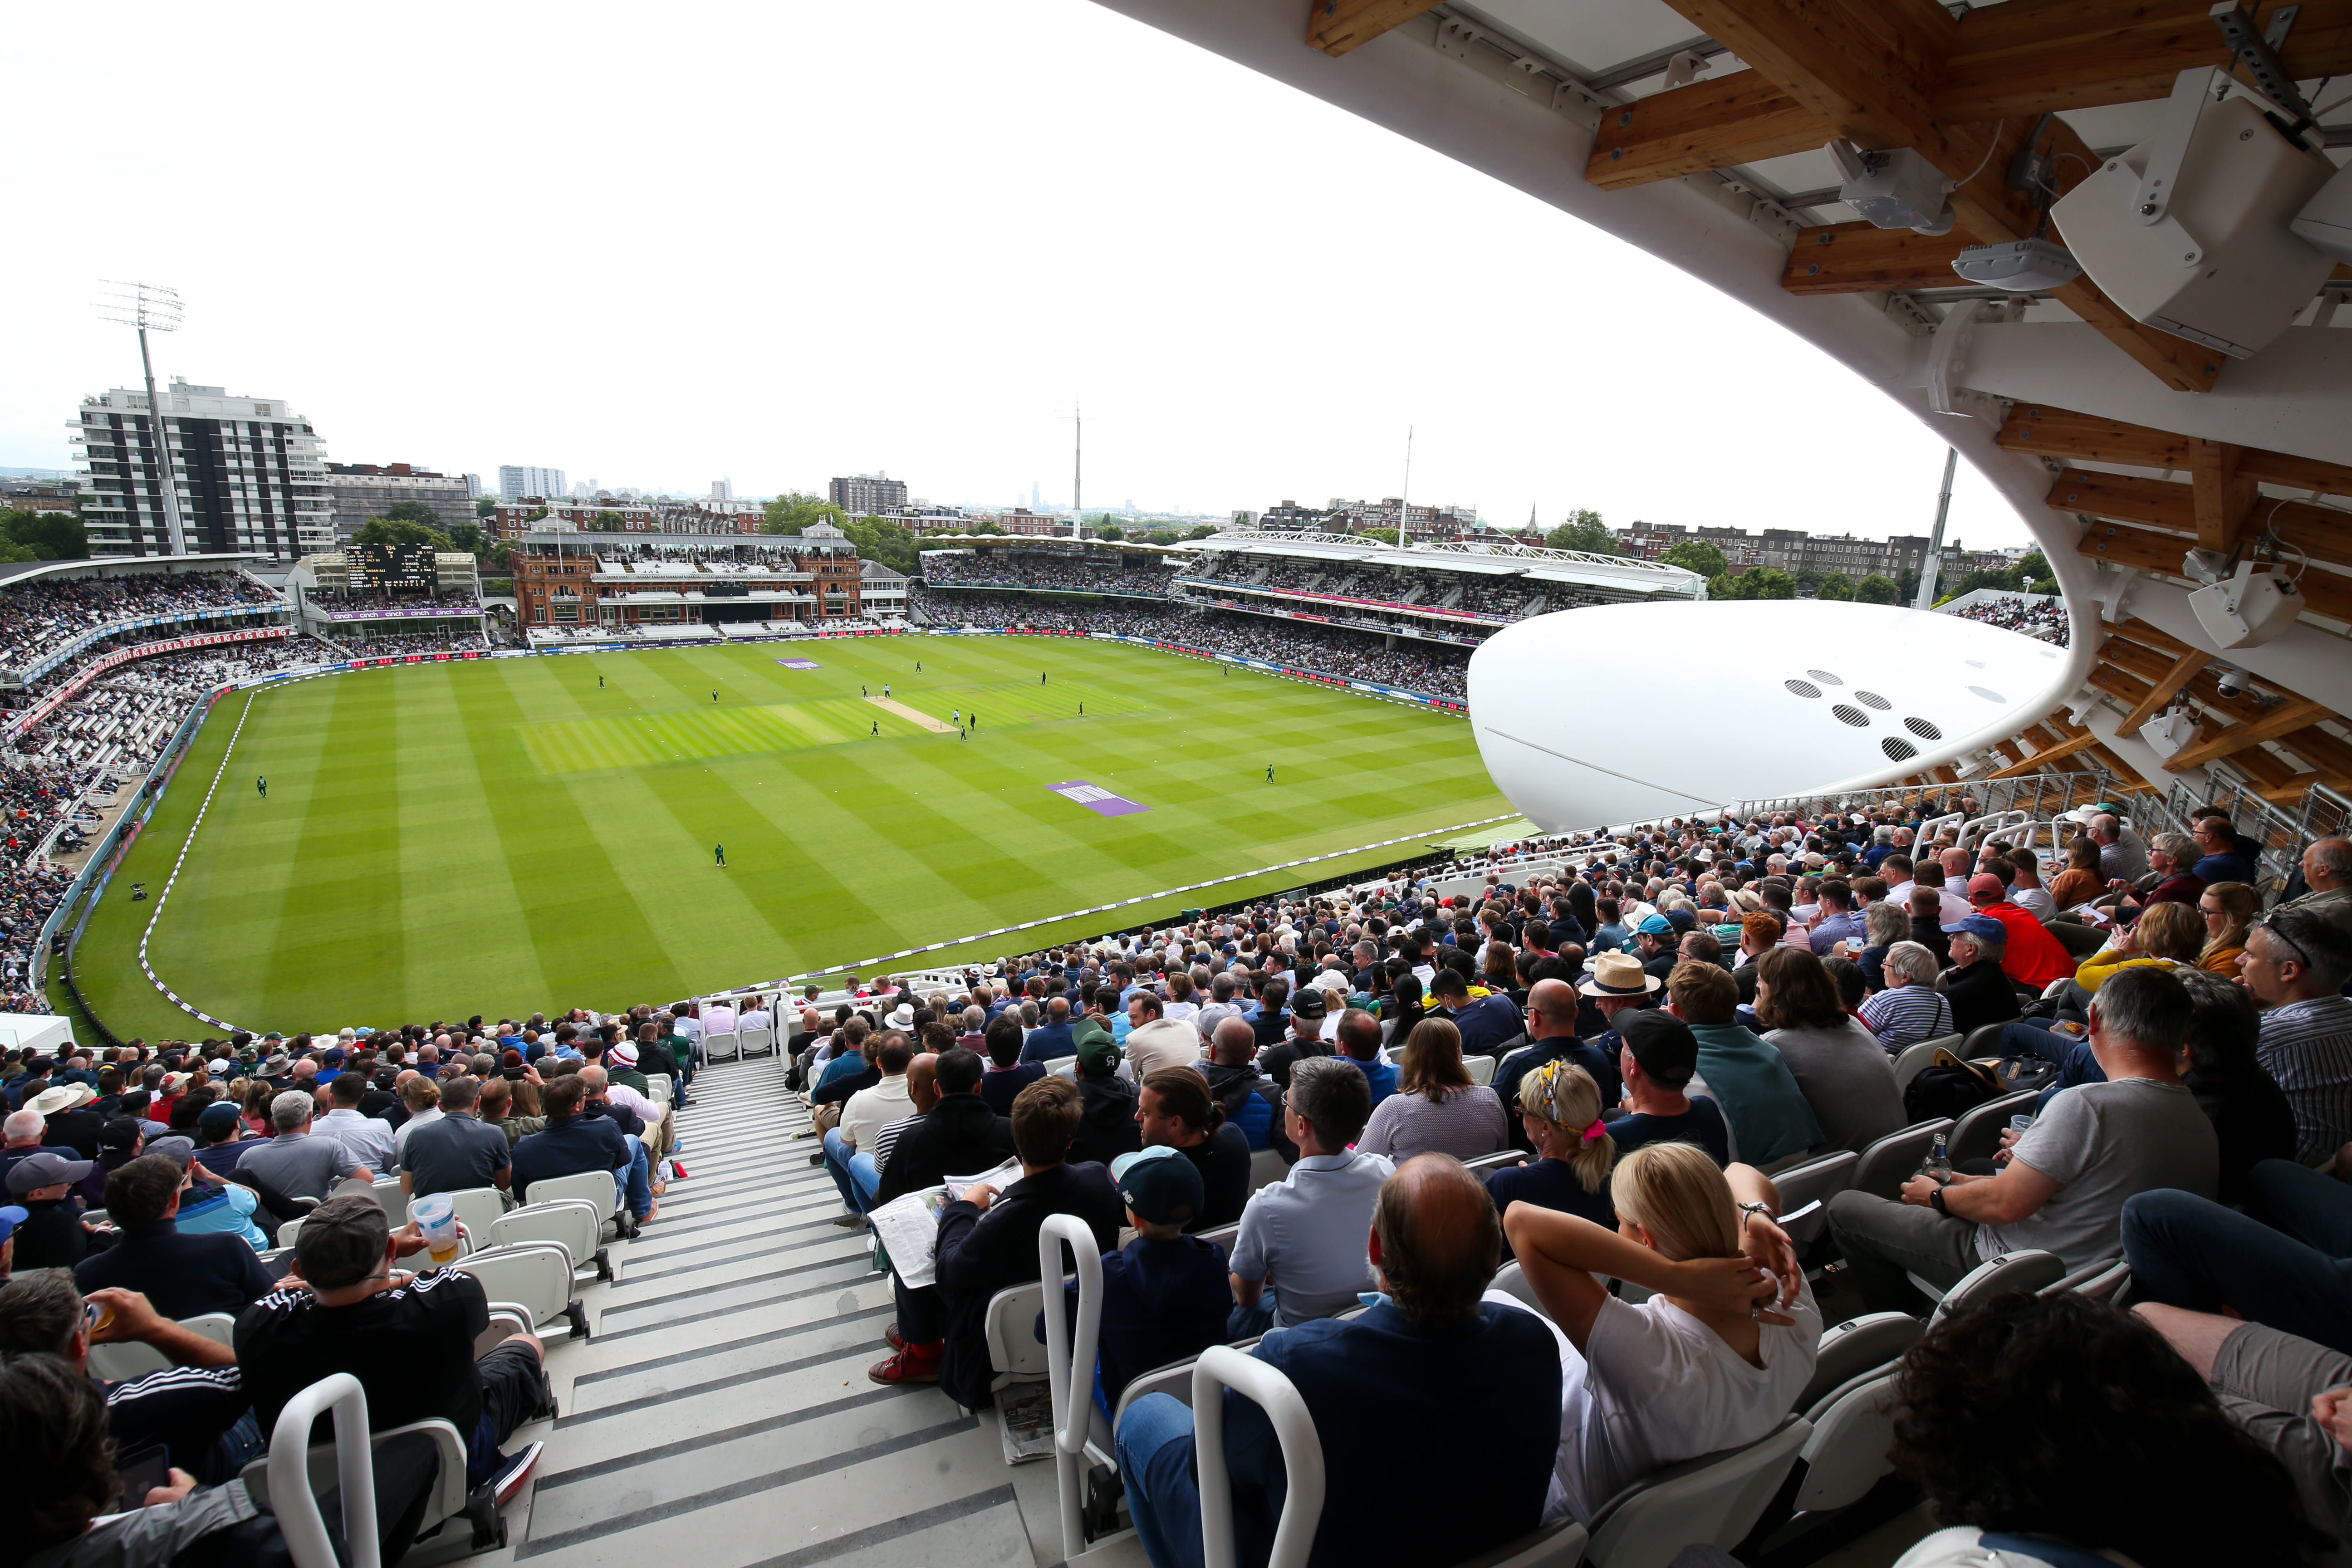 WilkinsonEyre's latest designs for Lord's Cricket Ground stands